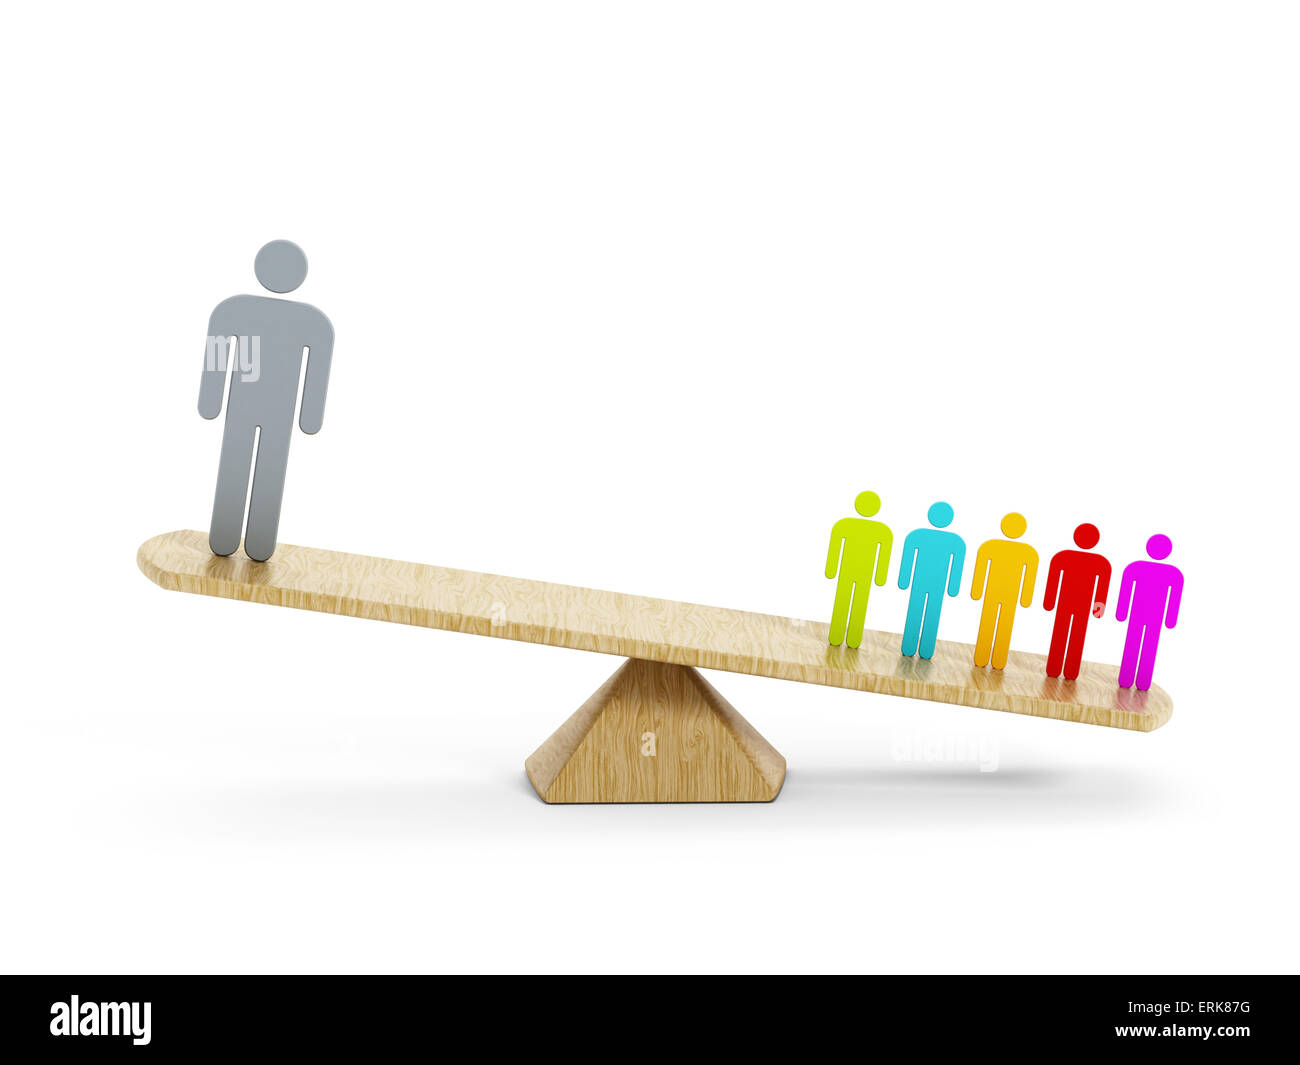 Business balance concept with one man versus a group of people on the seesaw. Stock Photo